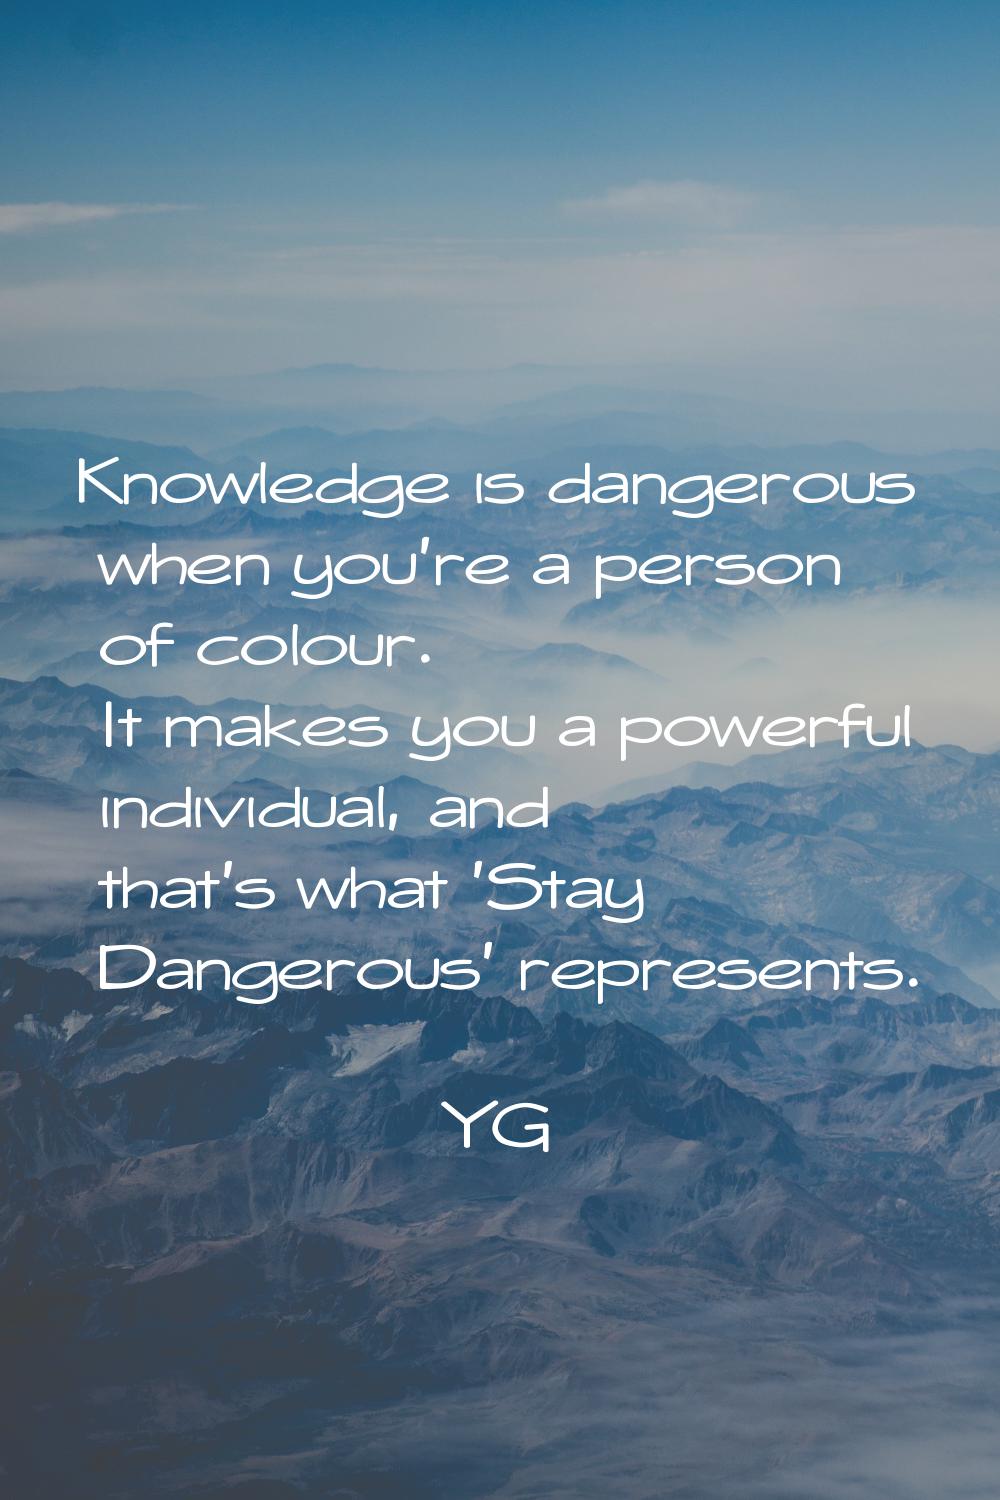 Knowledge is dangerous when you're a person of colour. It makes you a powerful individual, and that